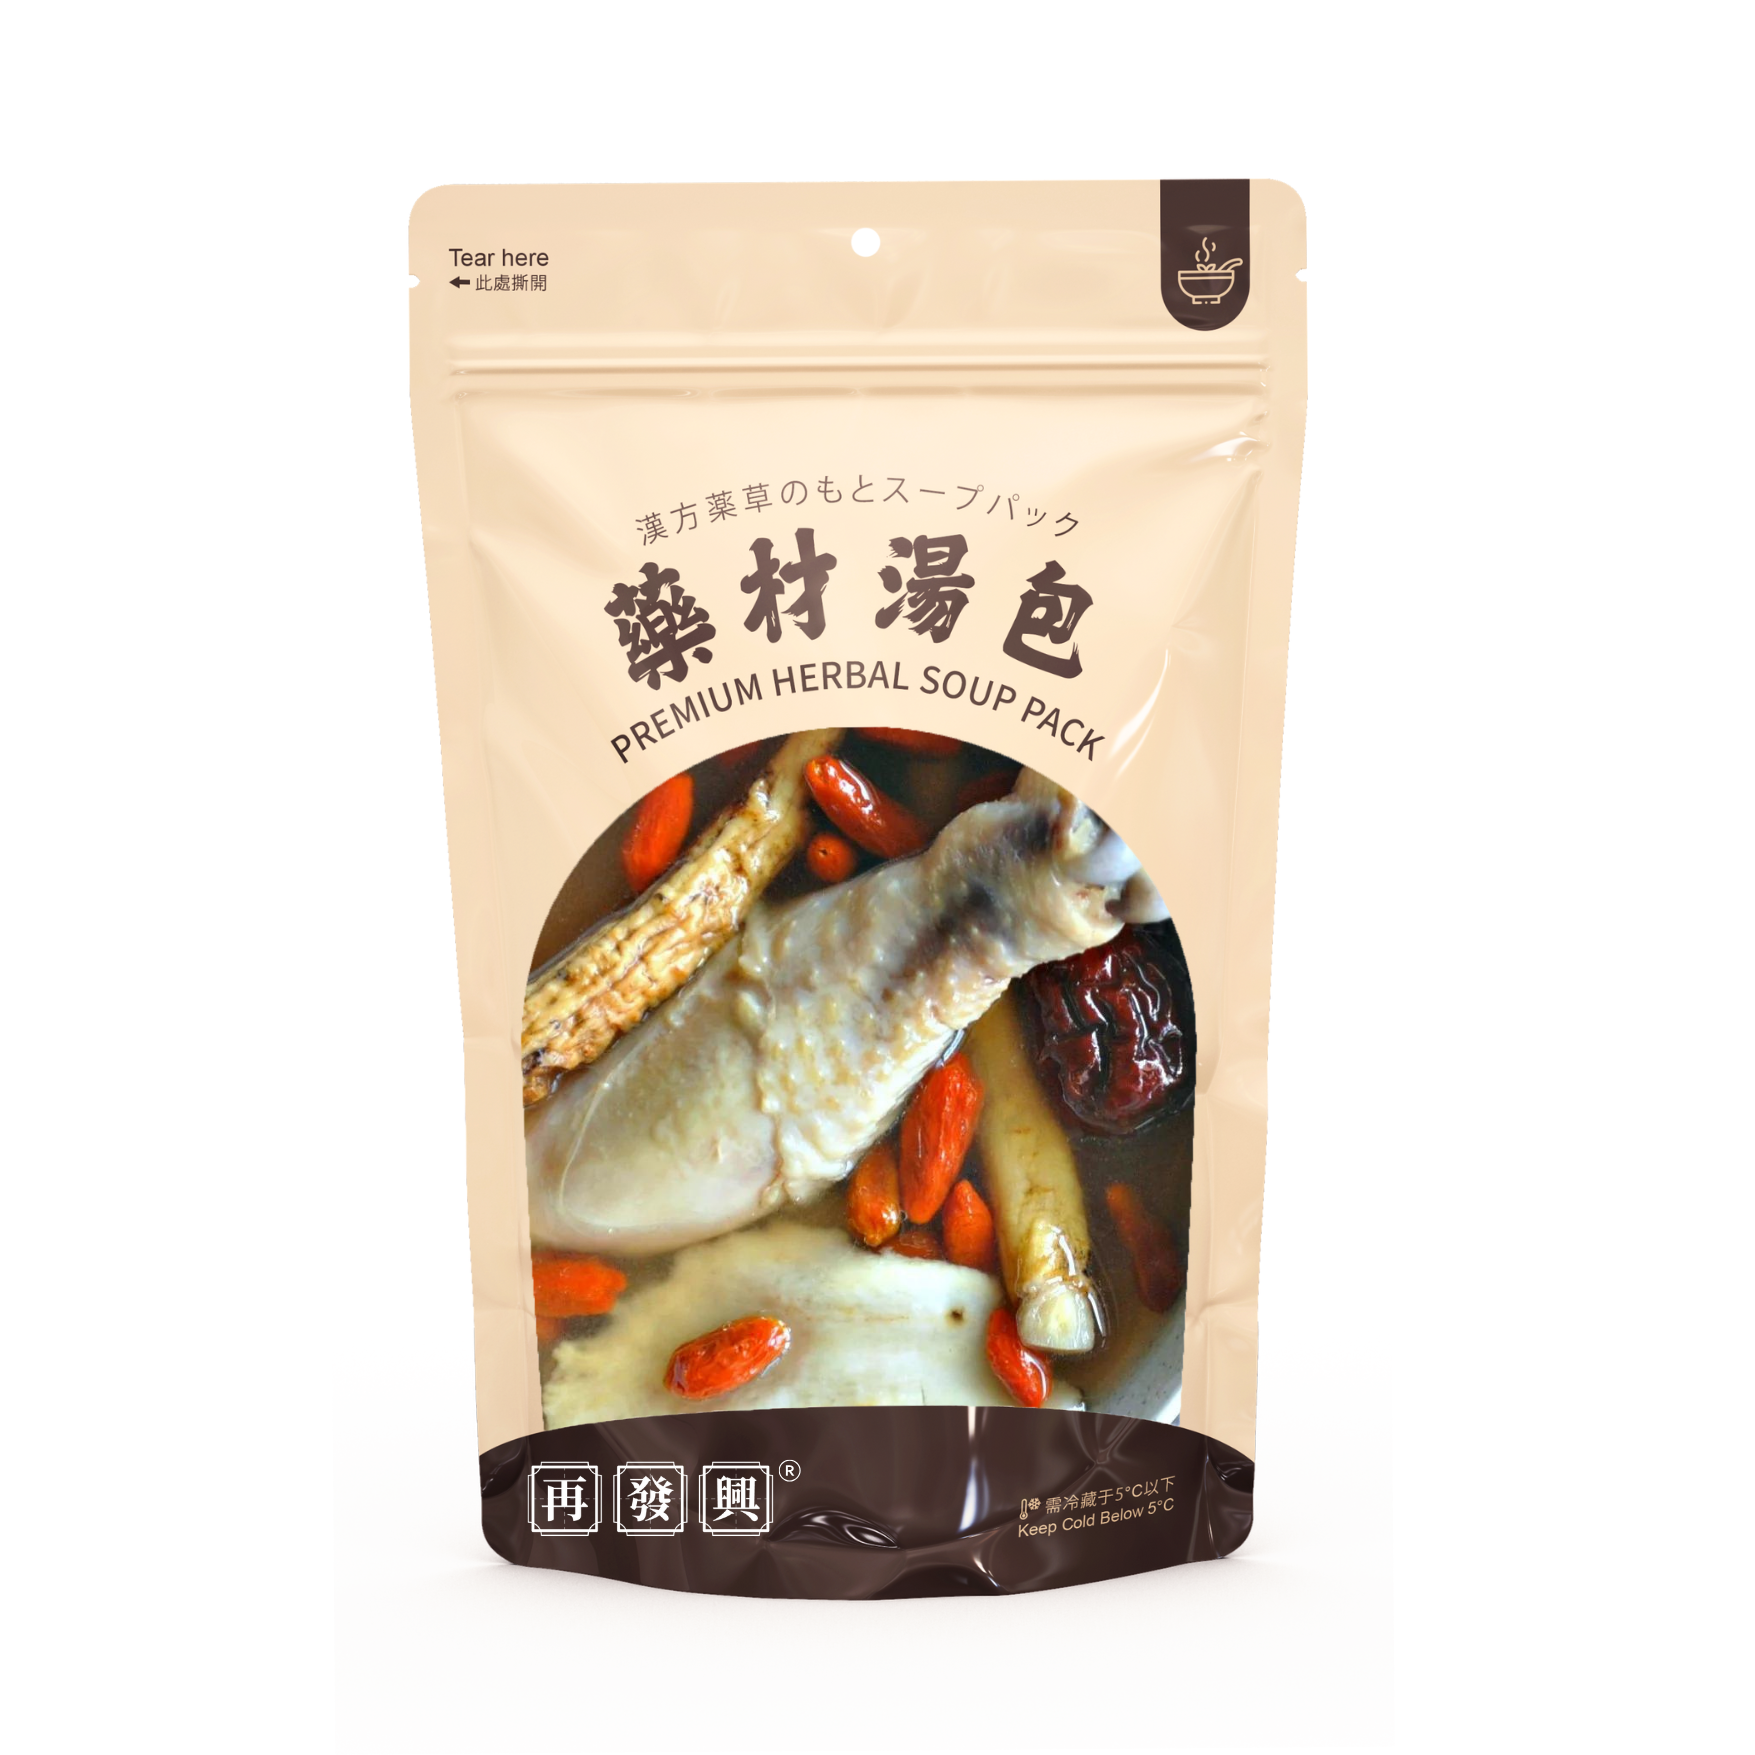 Herbal Chicken Soup Pack 清补鸡汤包